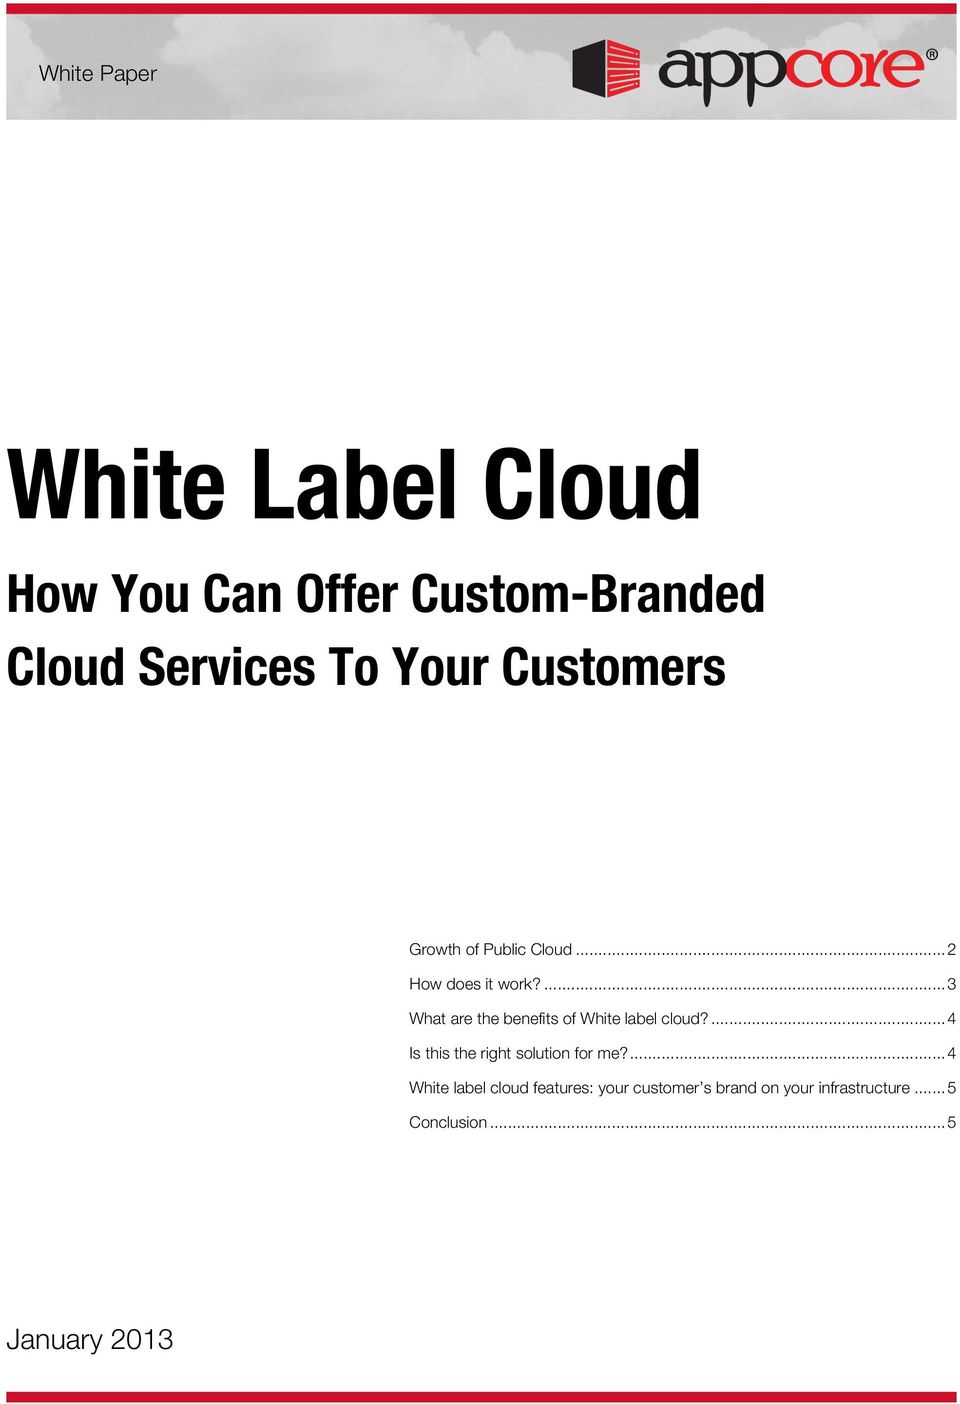 ... 3 What are the benefits of White label cloud?